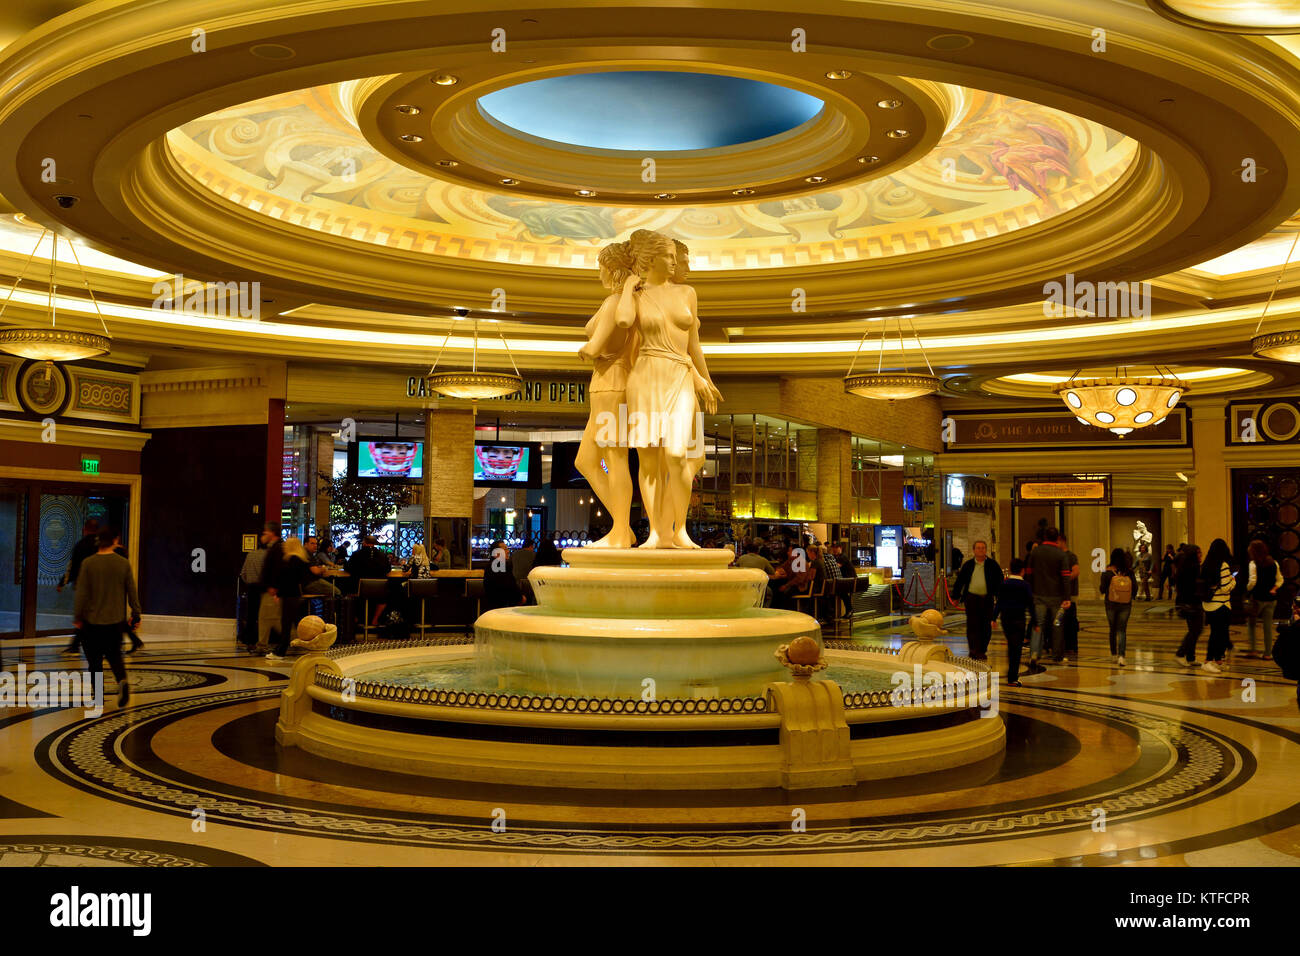 Las Vegas, Nevada, United States of America - November 19, 2017. Lobby of Caesars Palace casino hotel in Las Vegas, with statues and people. Stock Photo